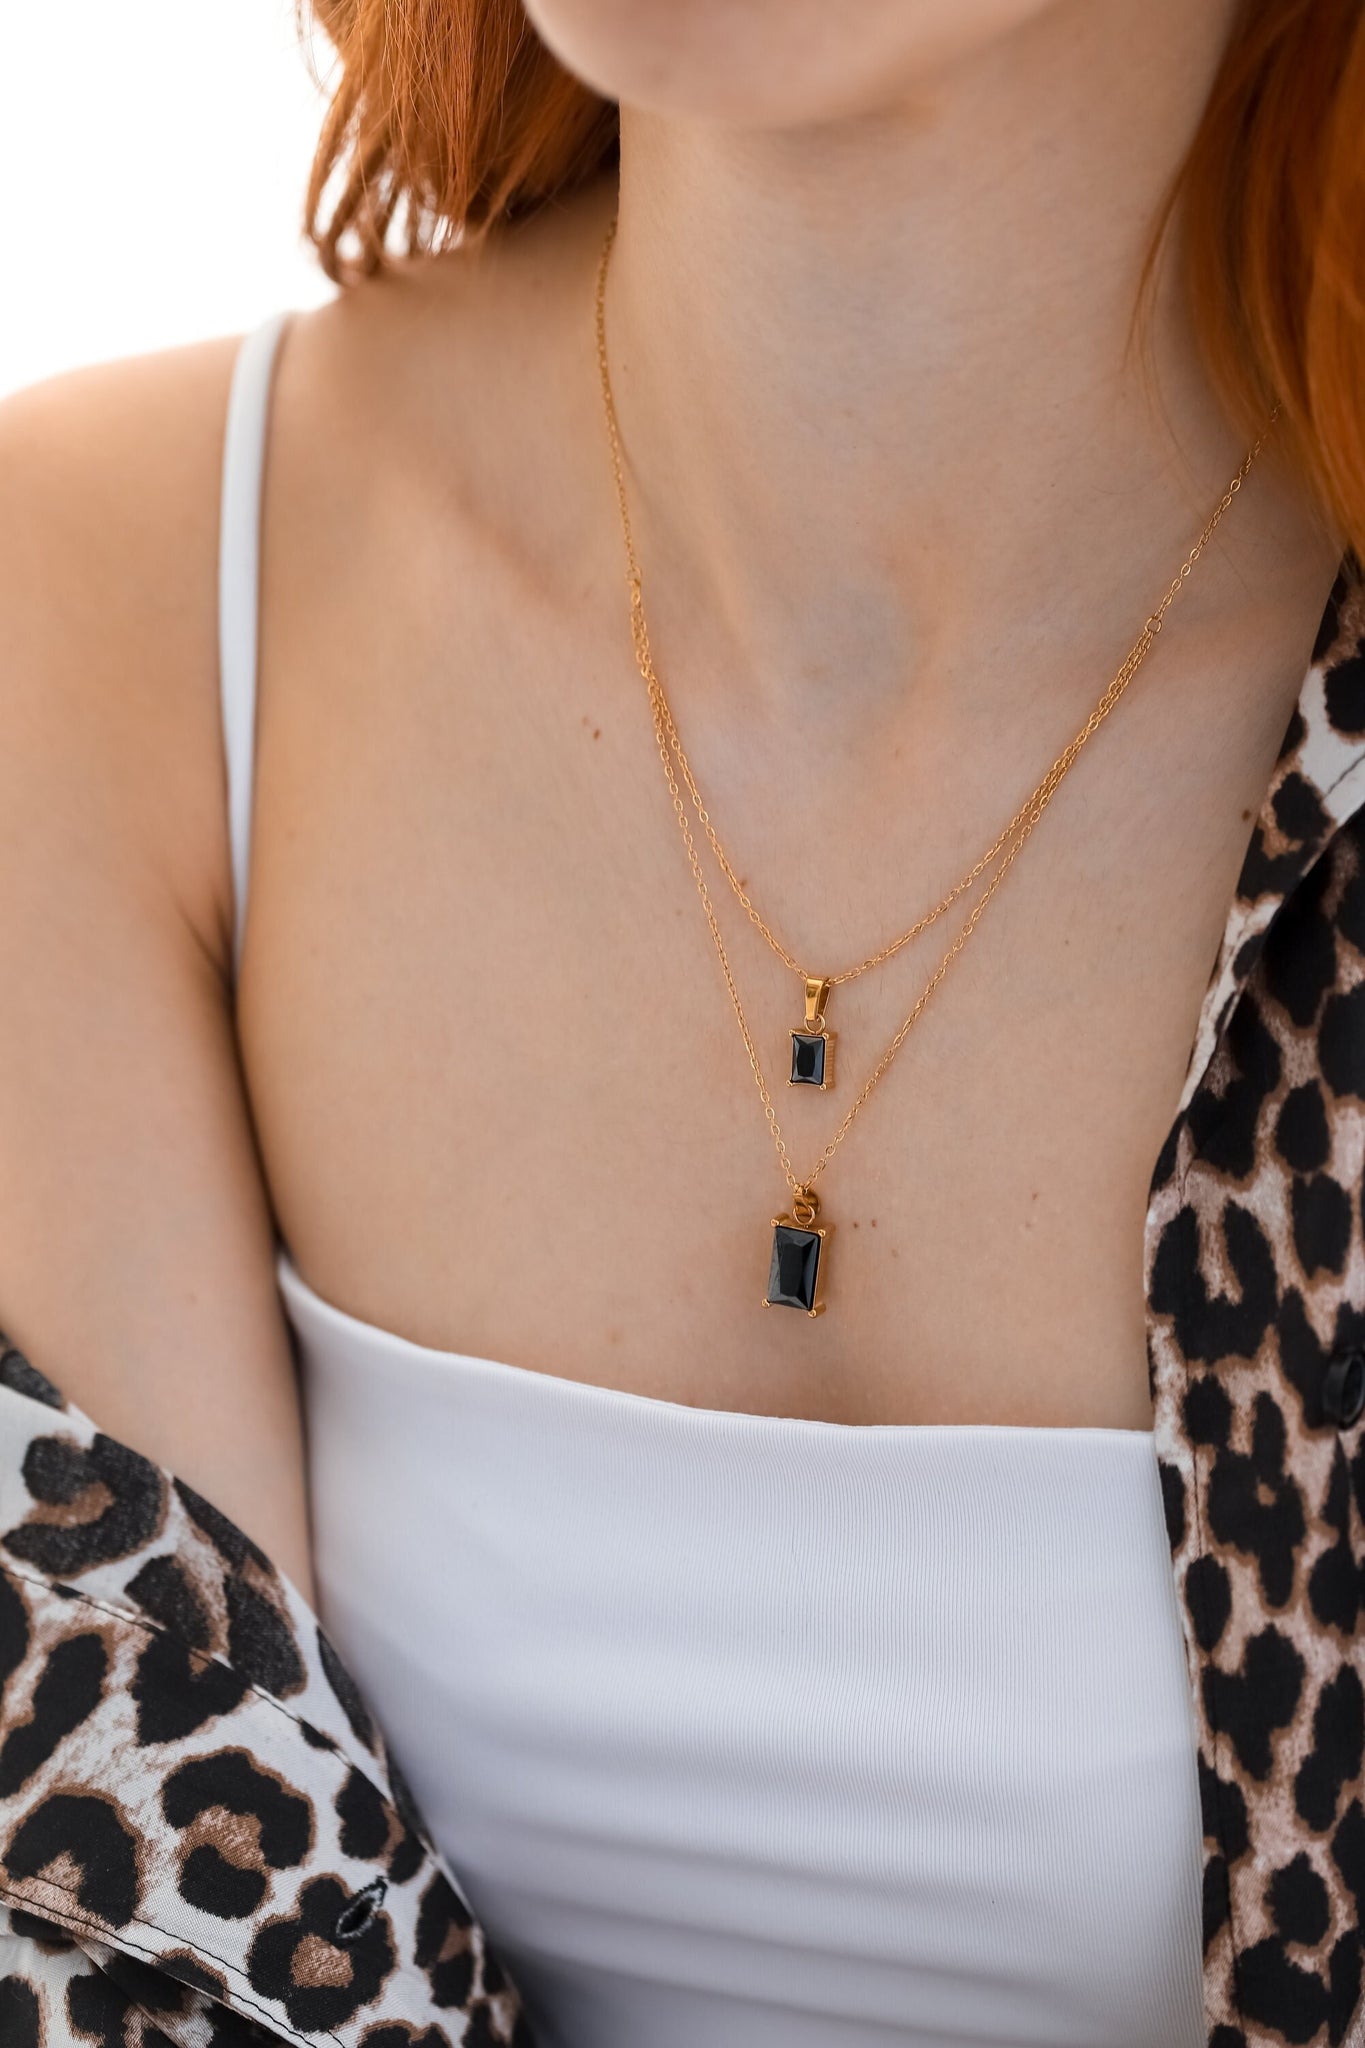 Black Stone Layered Necklace, 18K Gold, Double Layer Necklace, Dainty Necklace, Black Stone Pendant, Waterproof Necklace, Necklace For Mom